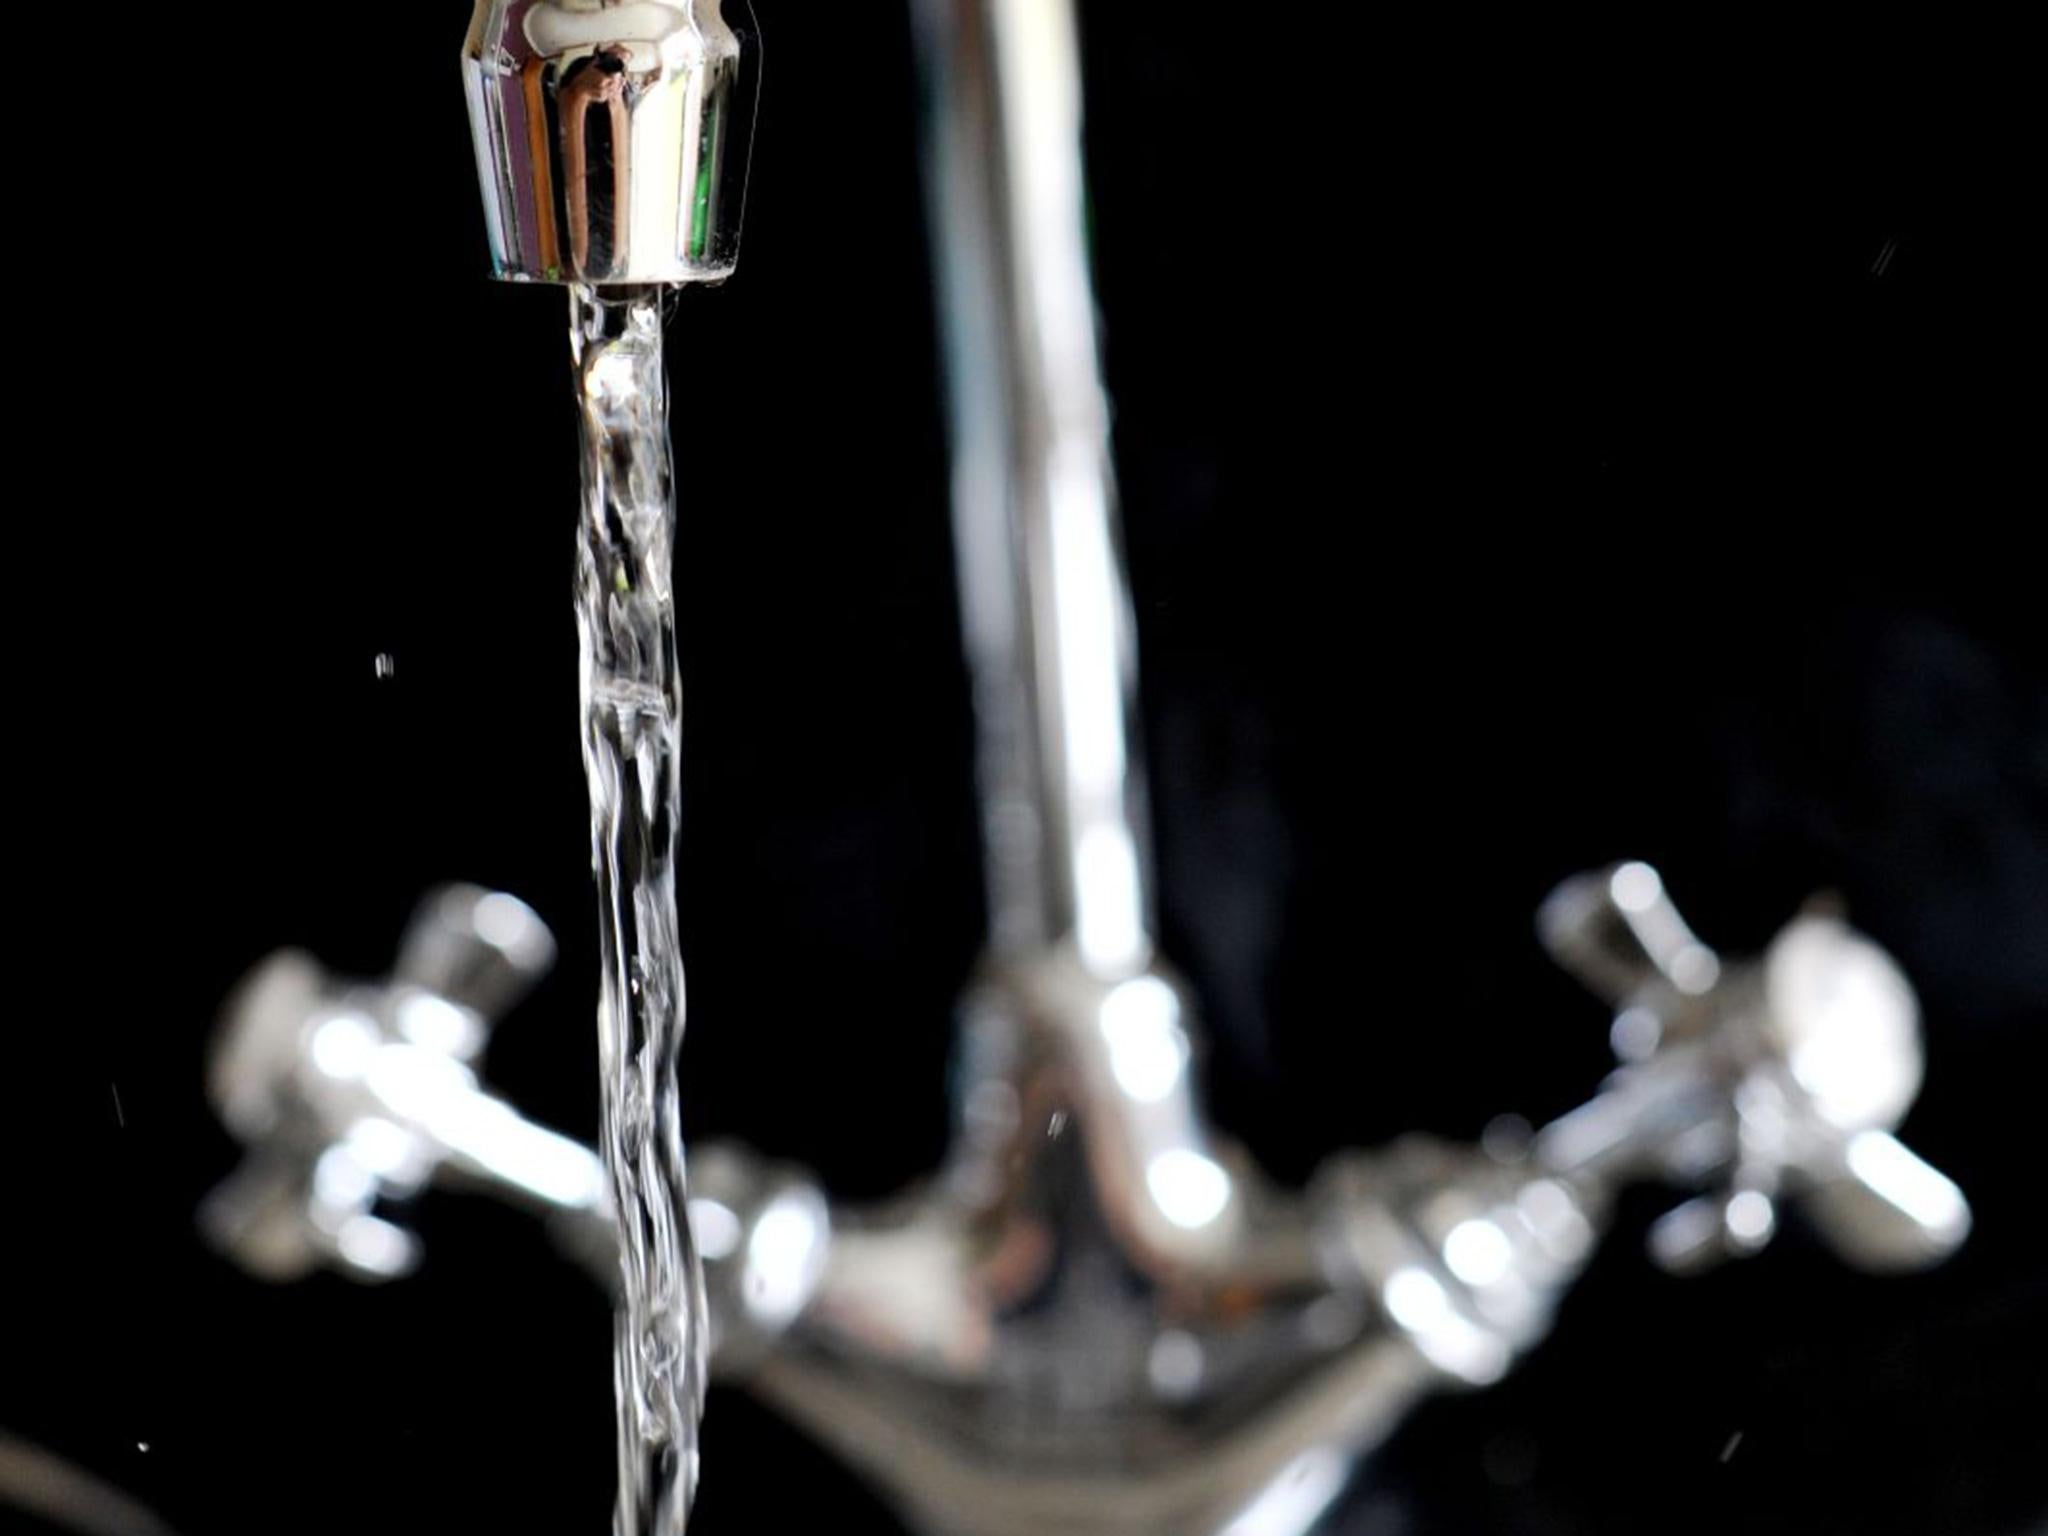 Thames Water said it would seek to minimise redundancies wherever possible